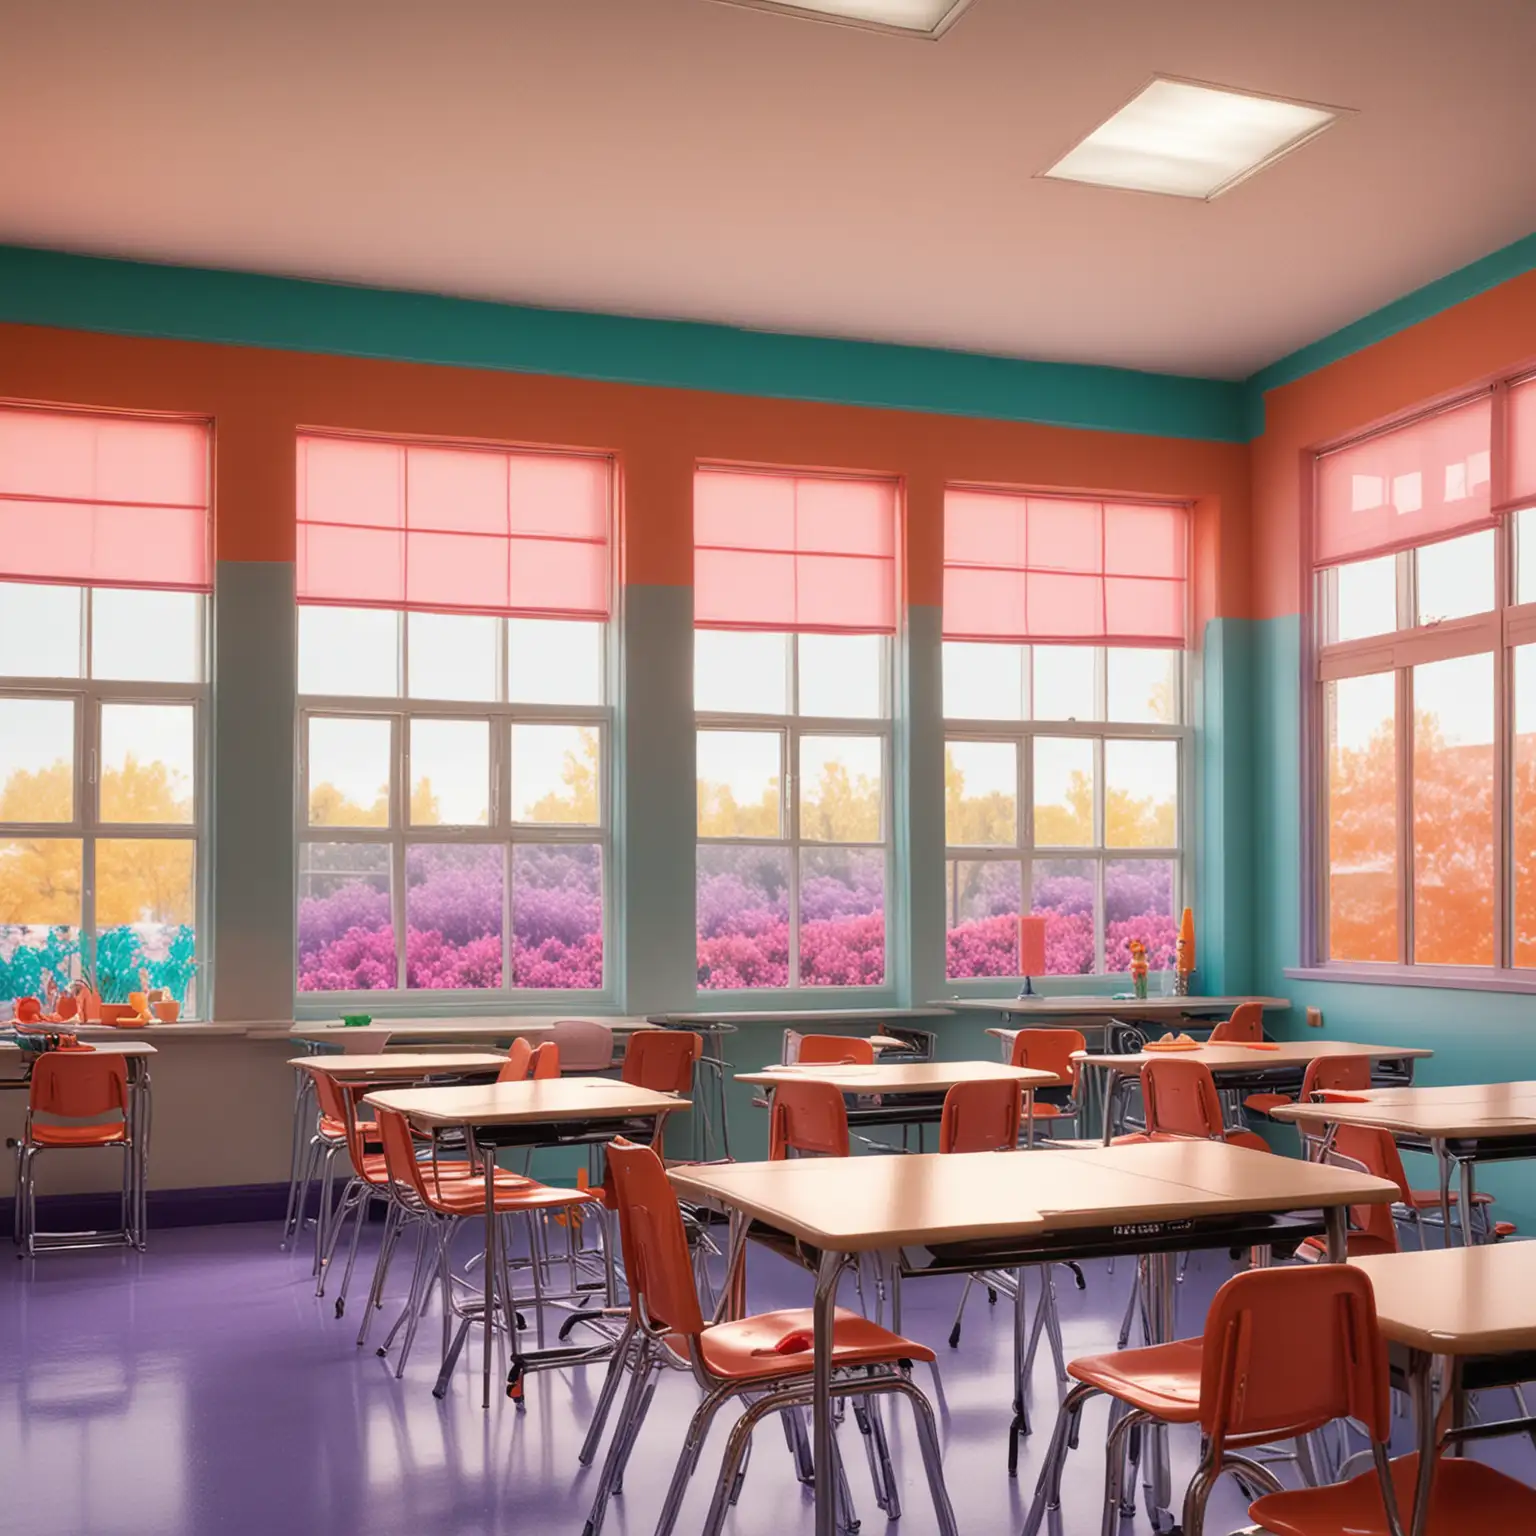 Vibrant Midday Classroom with Colorful Decor